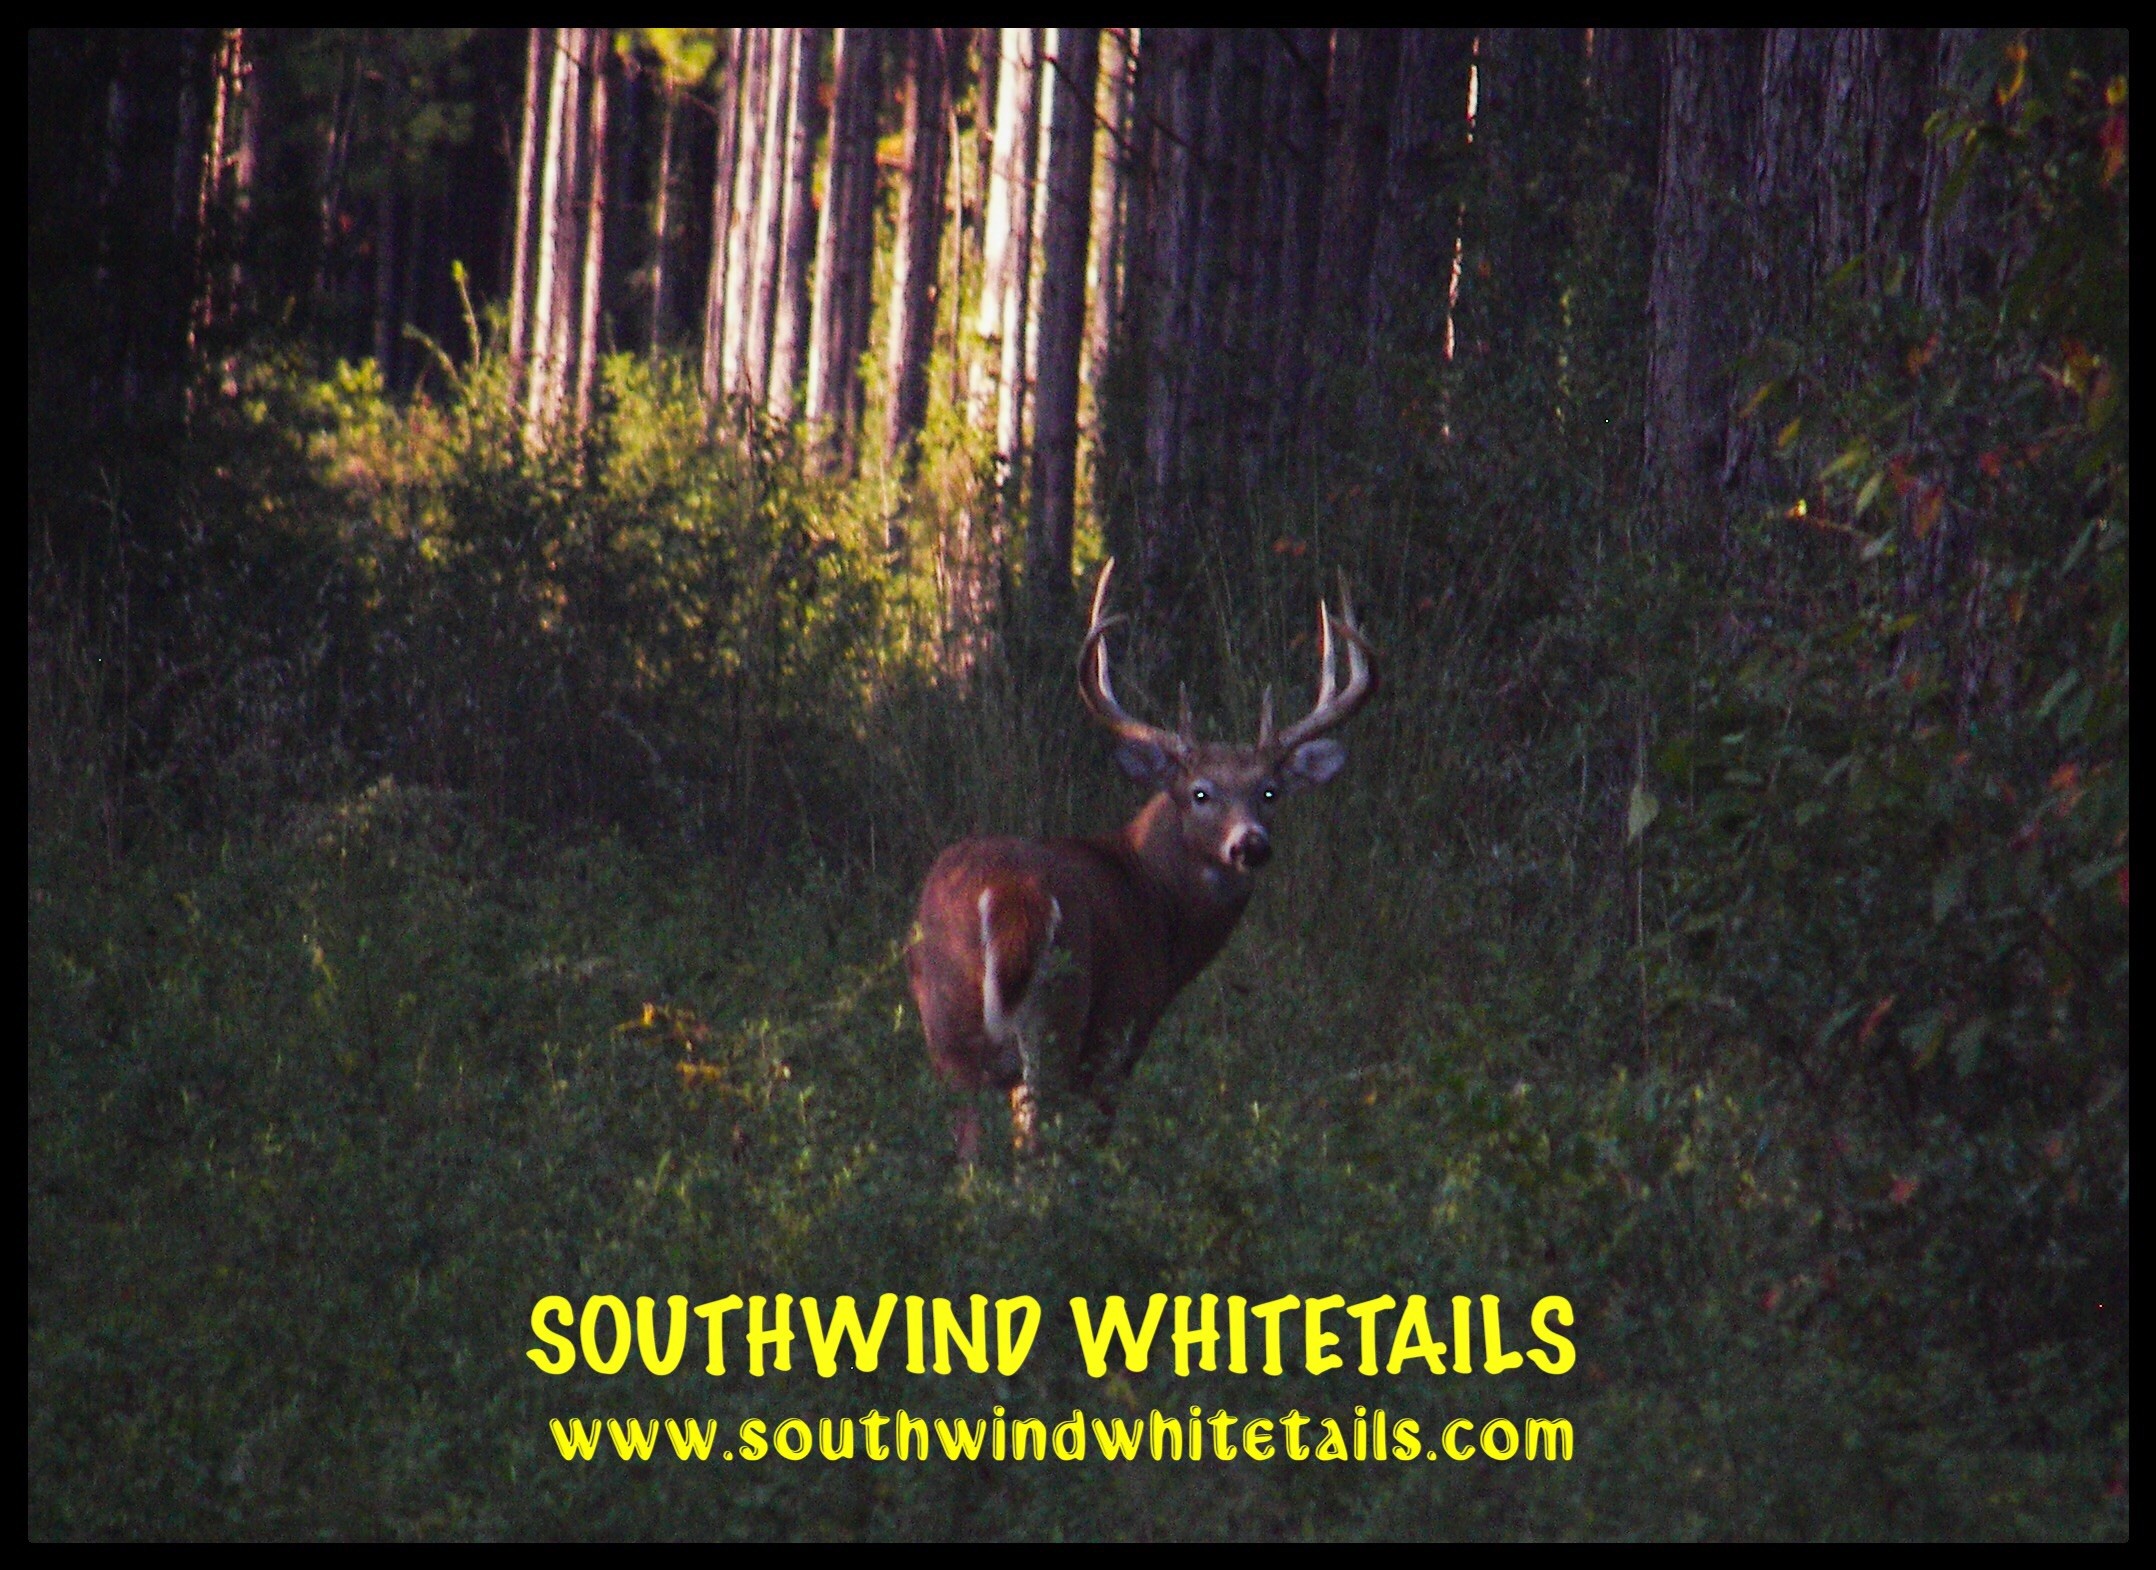 Southwind Whitetails: Whitetails Hunt